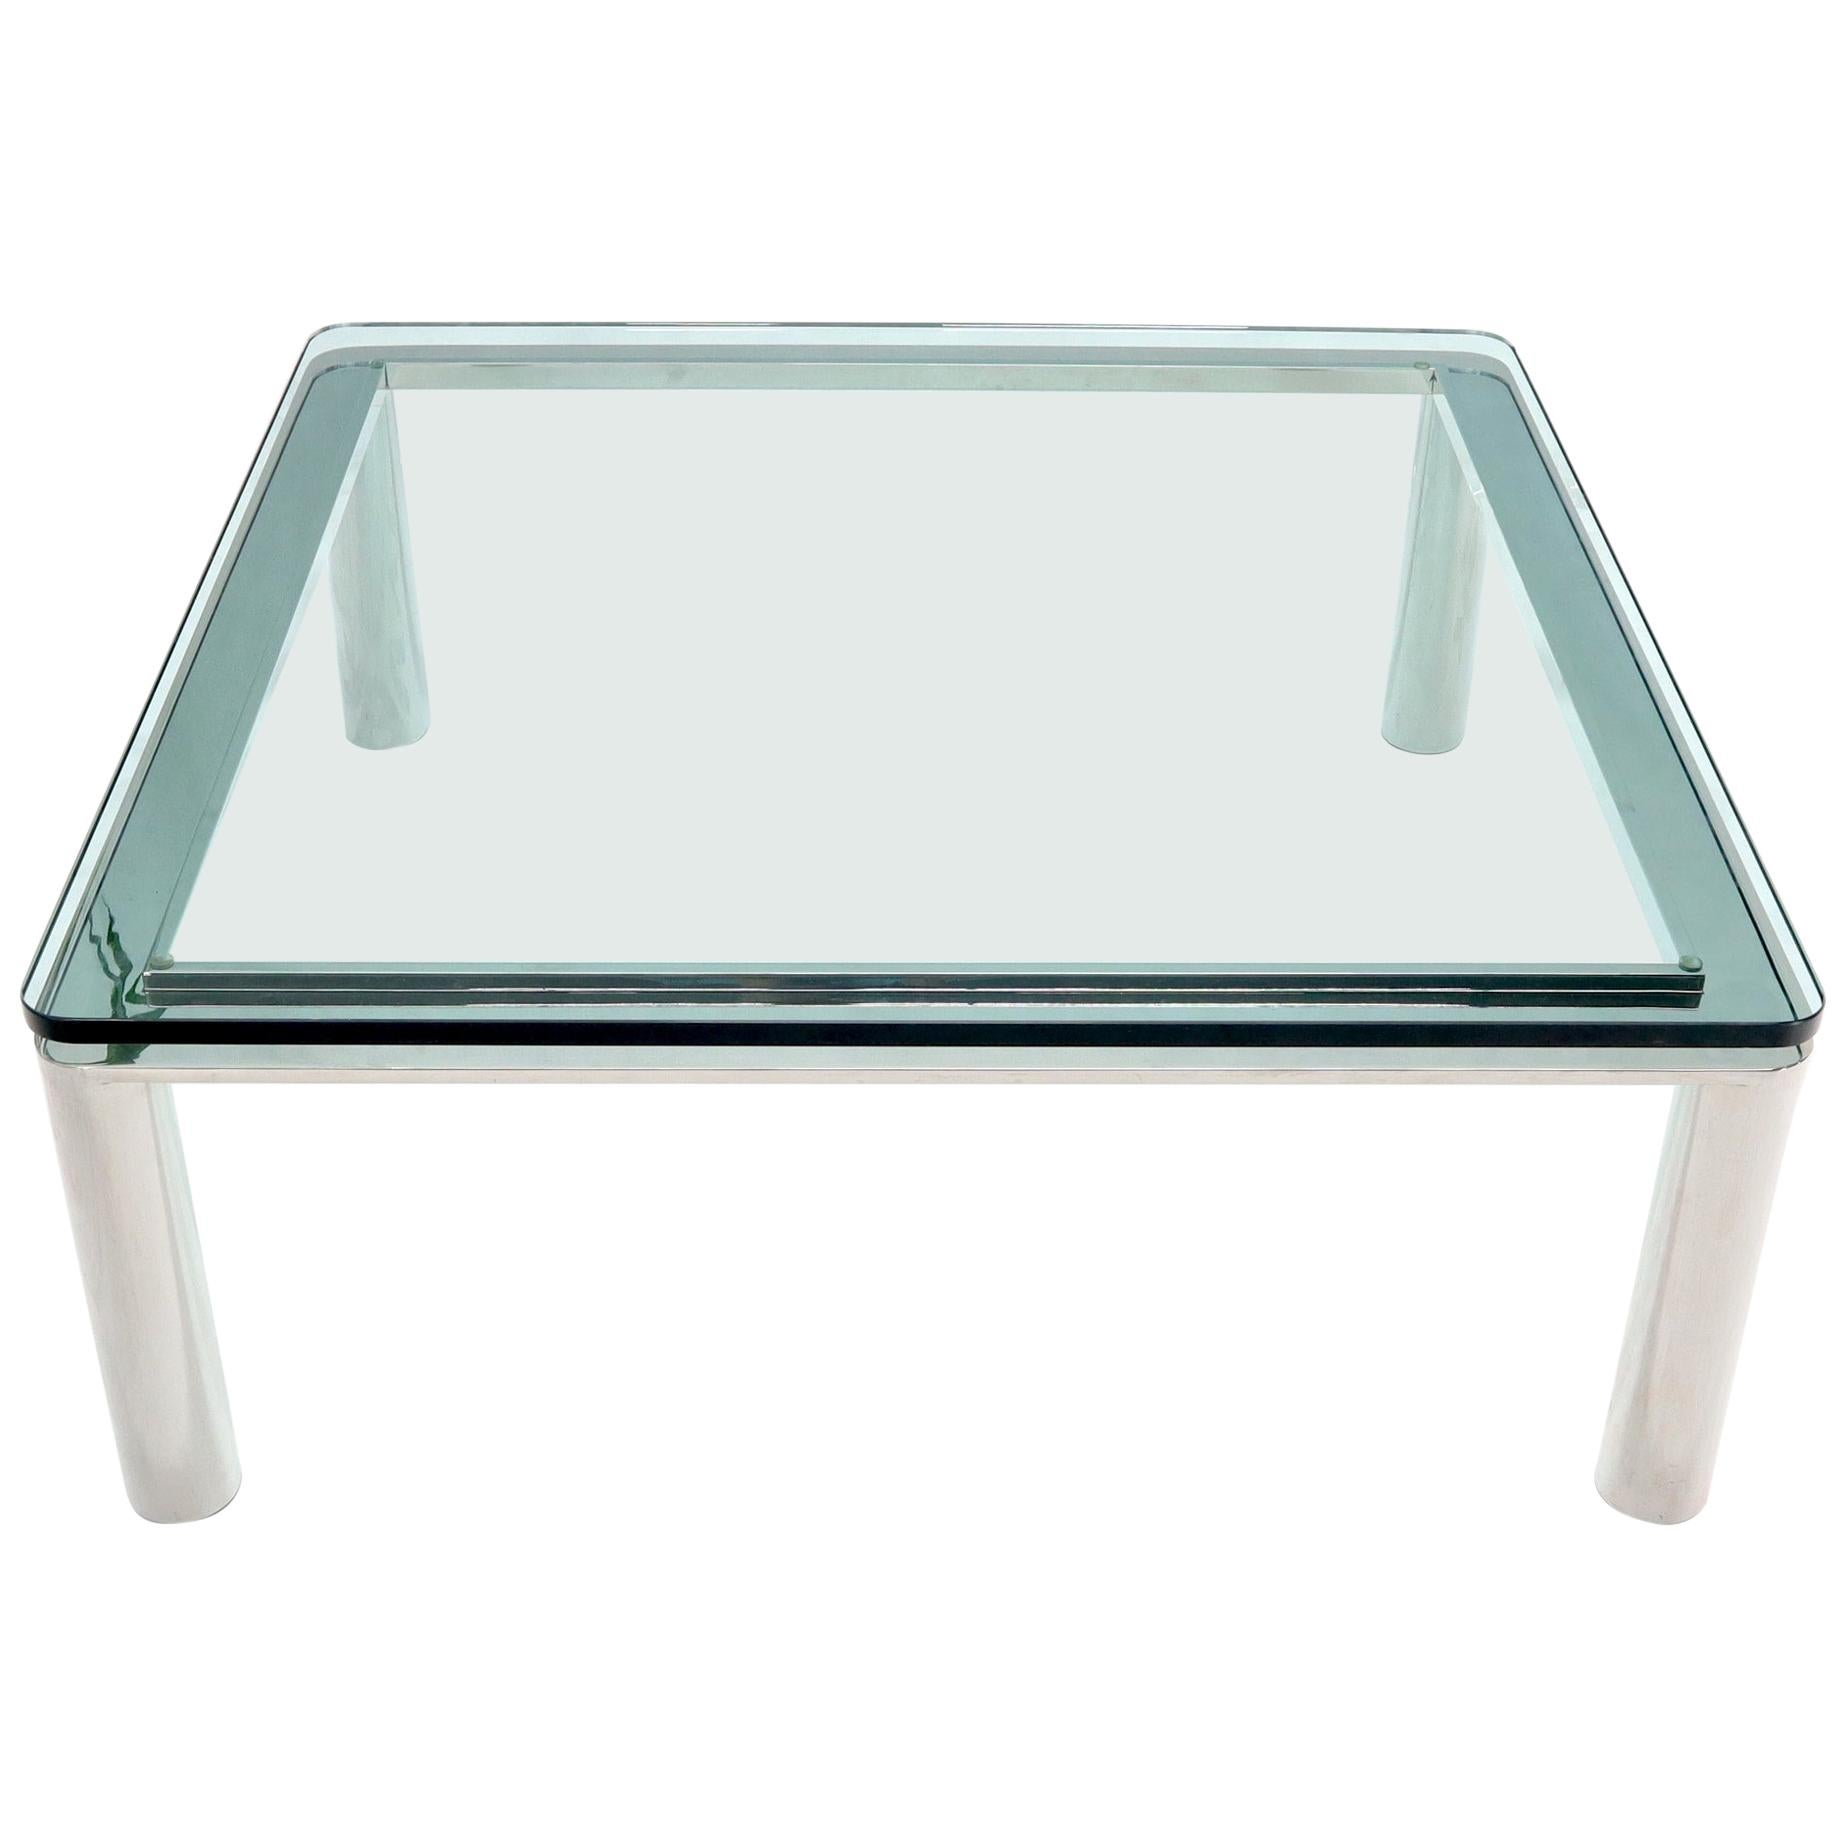 Floating Glass Top Coffee Table Coffee Table Design Ideas